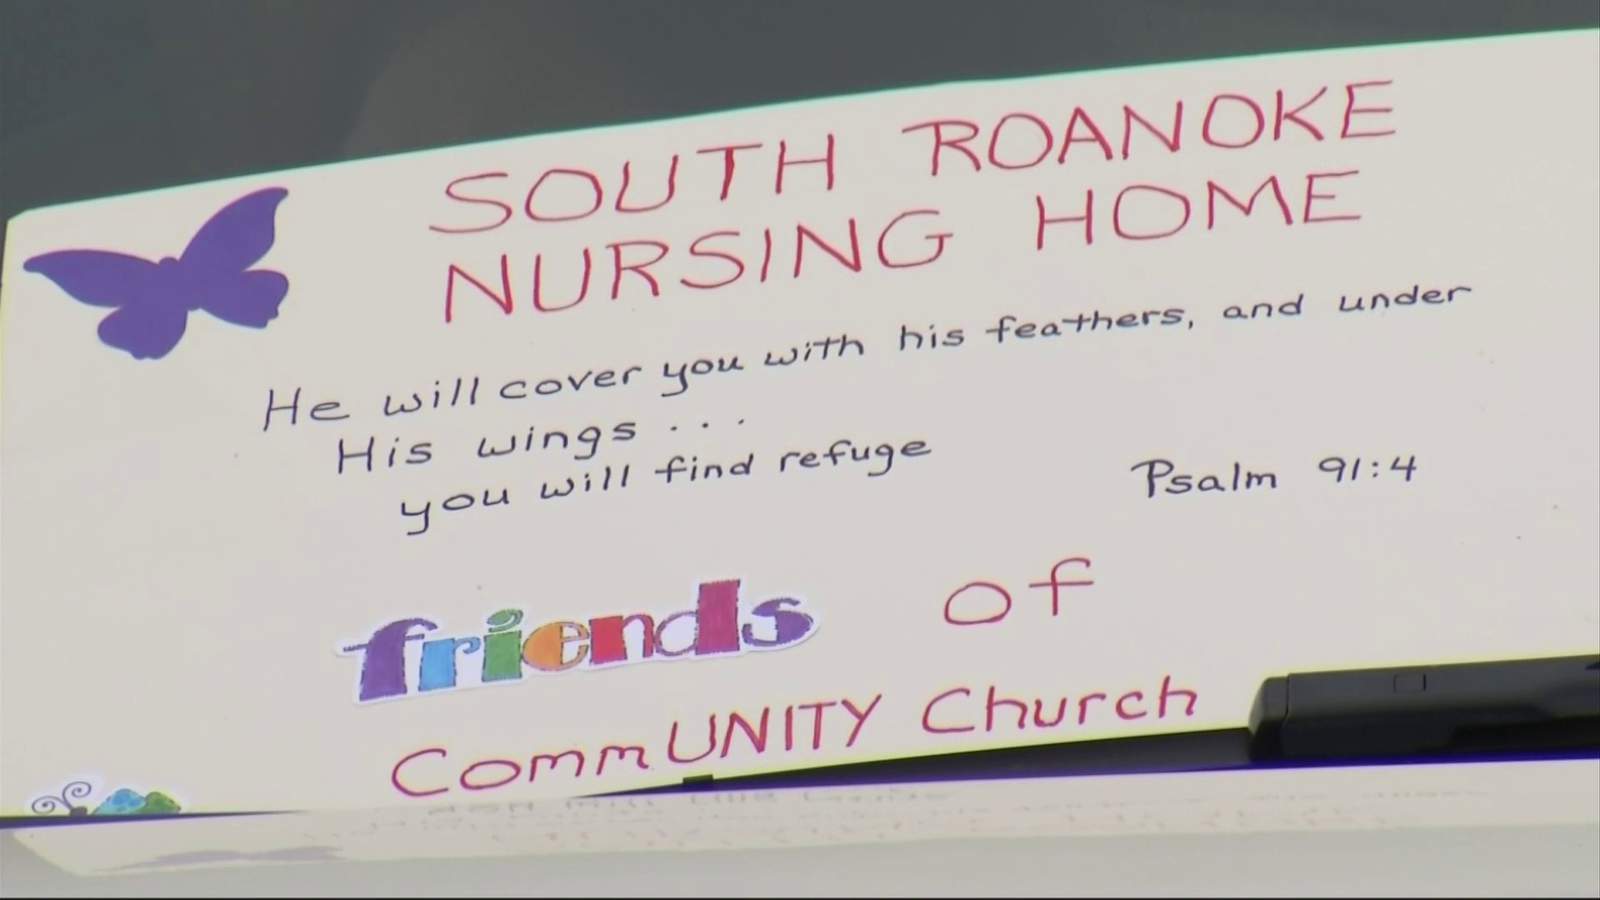 Church creates signs of support for South Roanoke Nursing Home residents